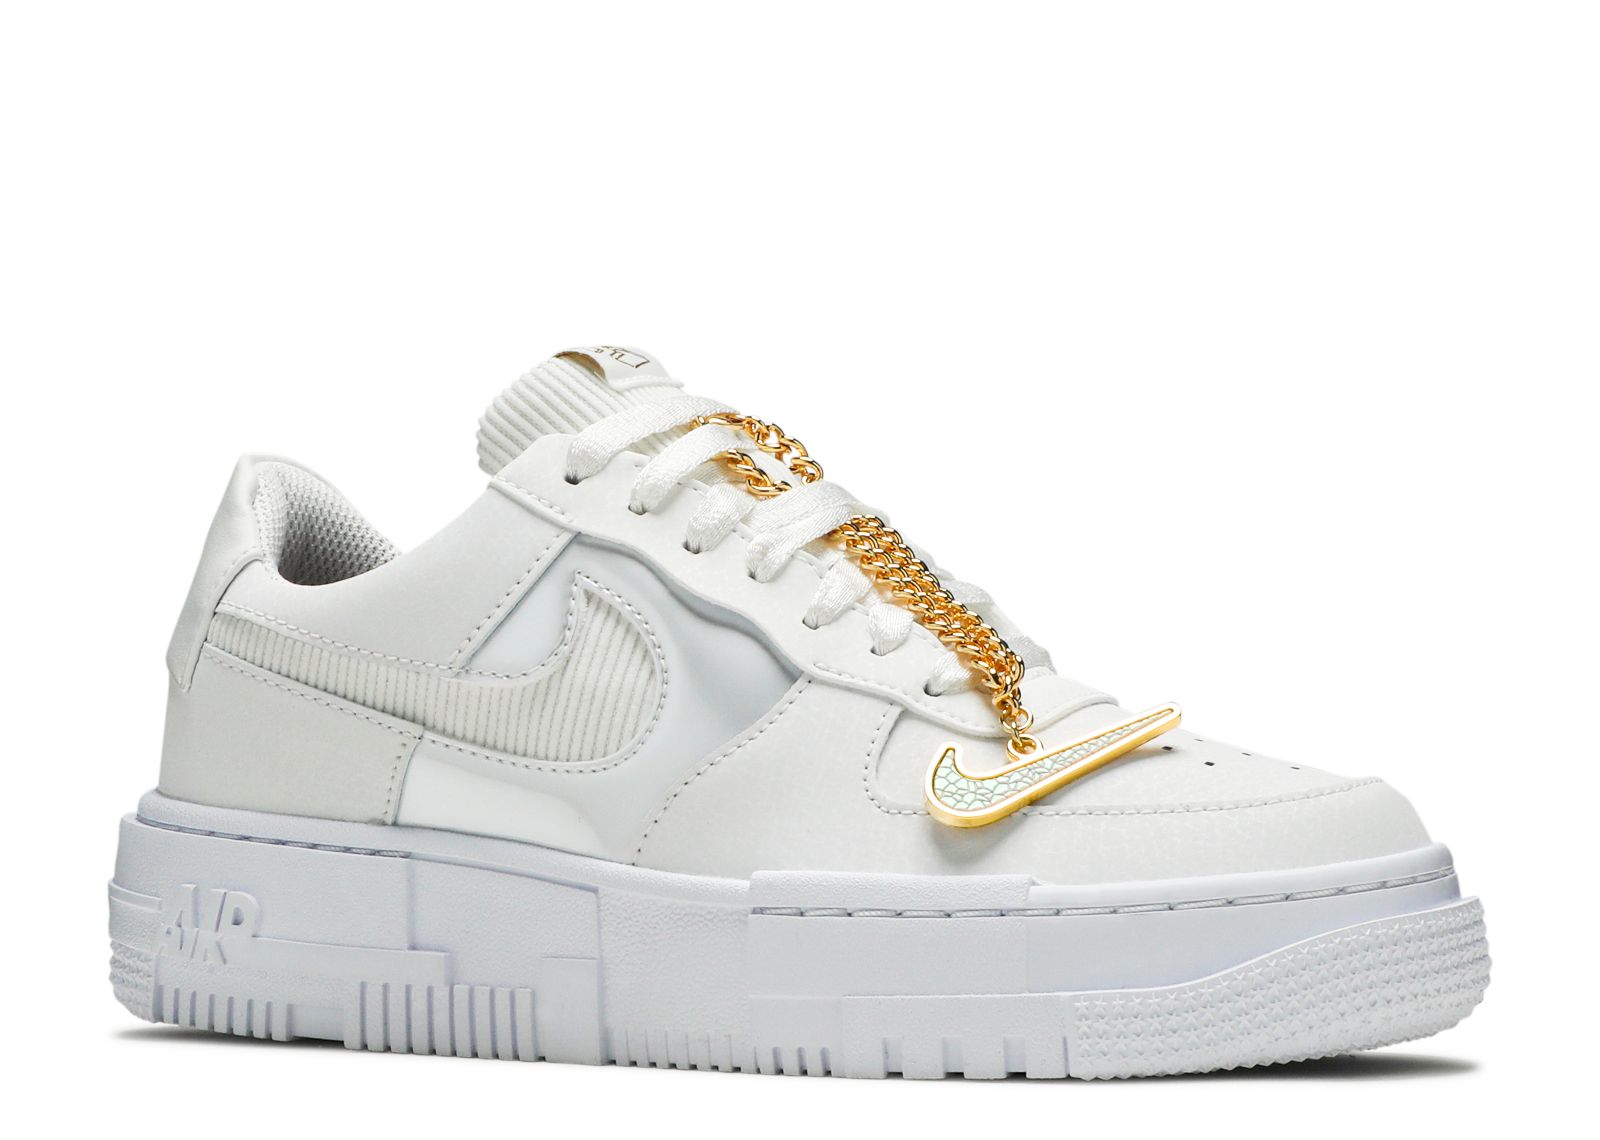 Buy > nike af1 pixel white gold chain > in stock